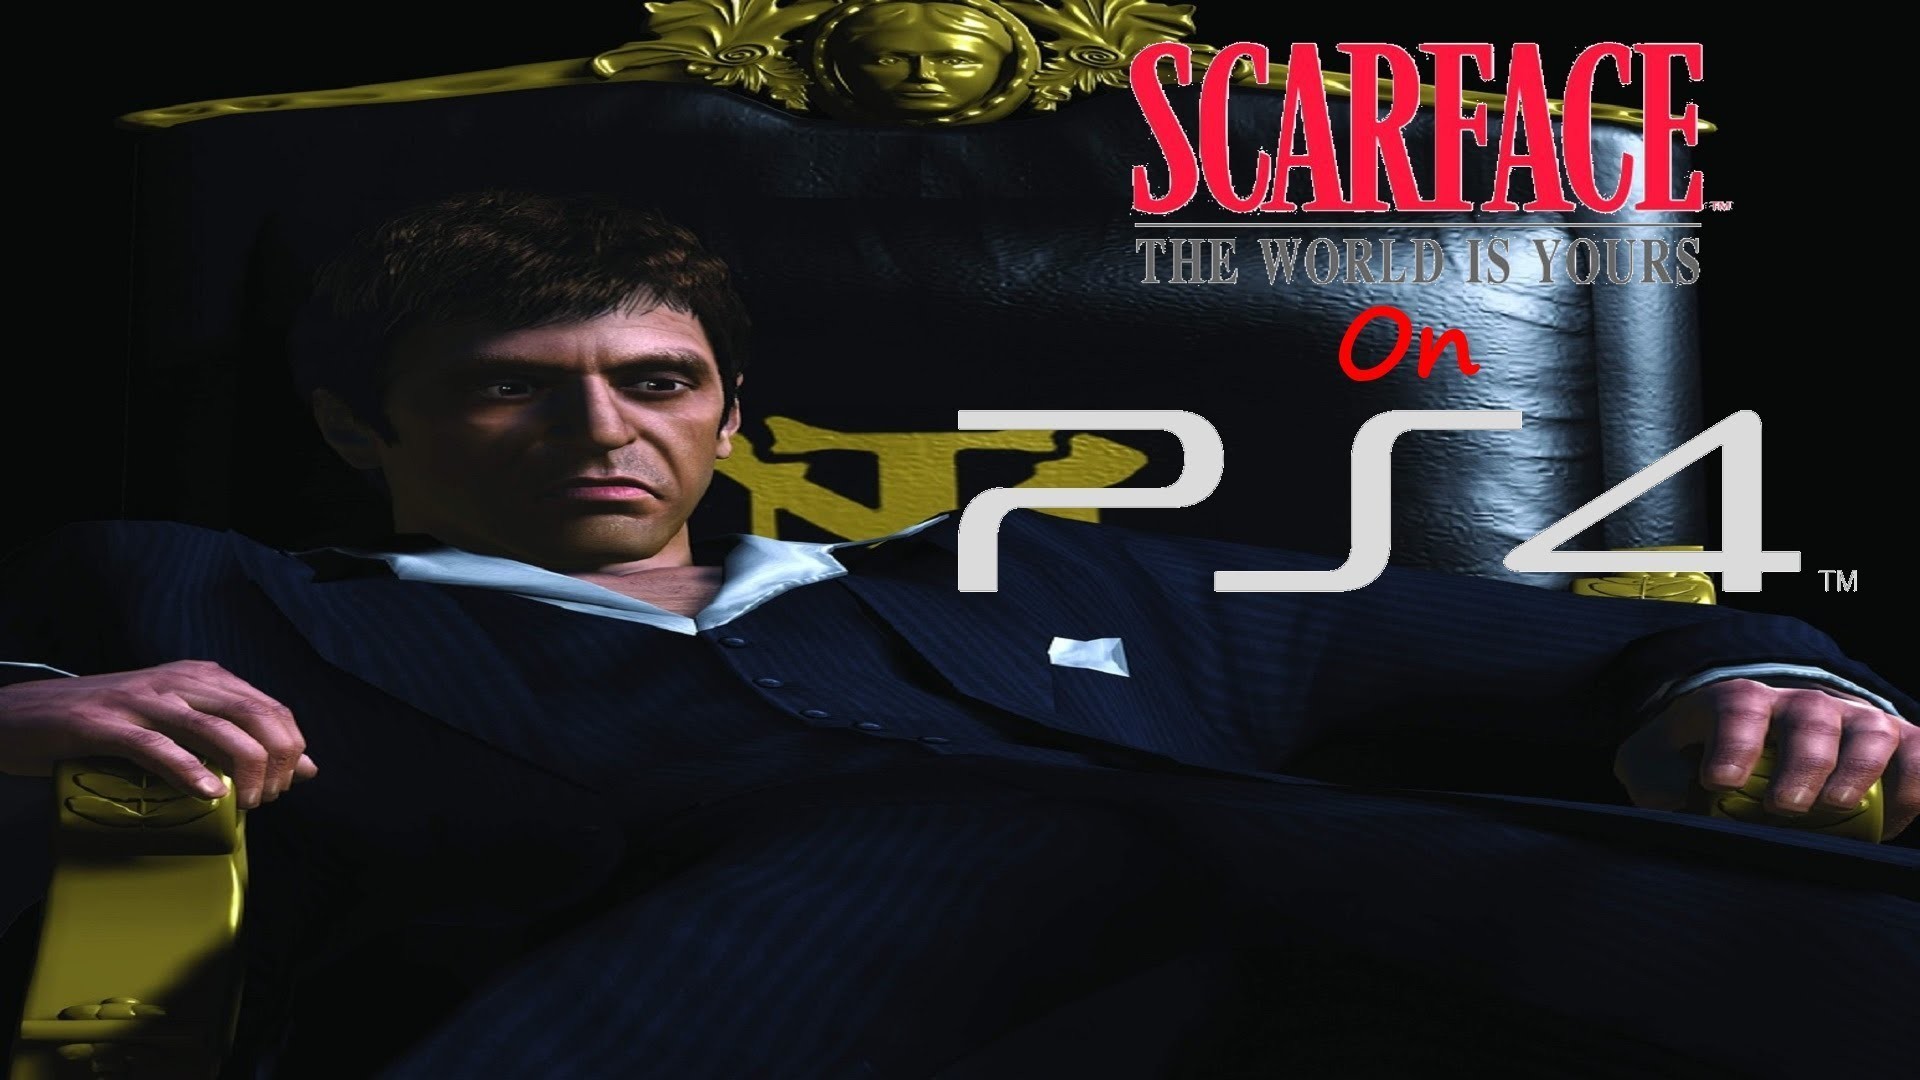 1920x1080 0 1322x1900 Scarface Phone Wallpaper  Scarface Pictures Scarface  Wallpaper (67+ images)